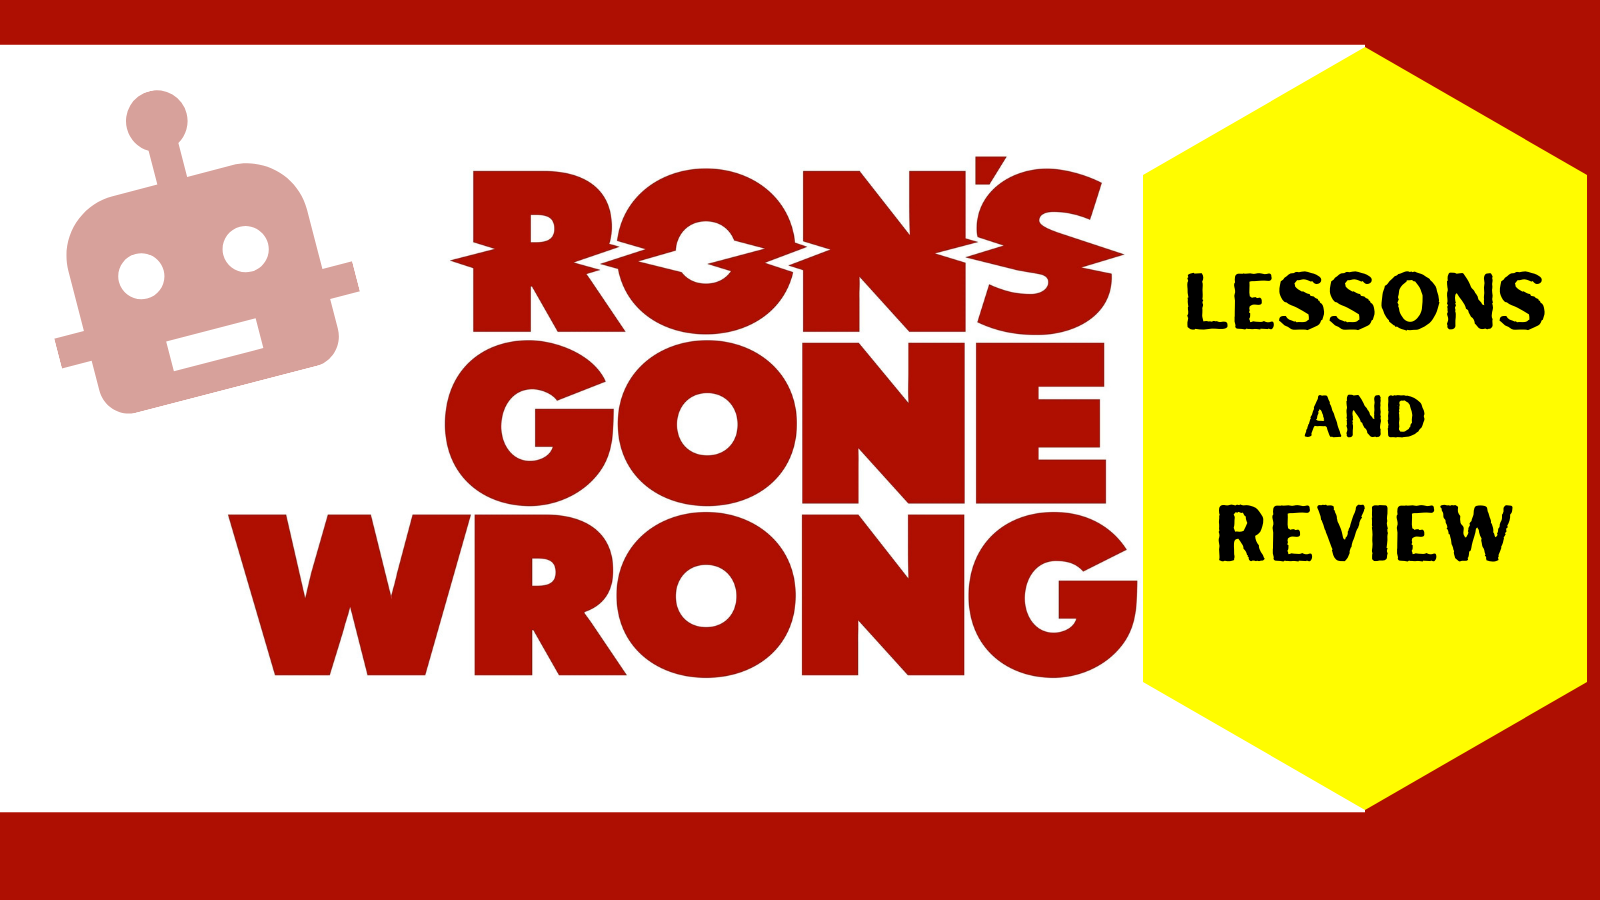 Lessons from Rons Gone Wrong